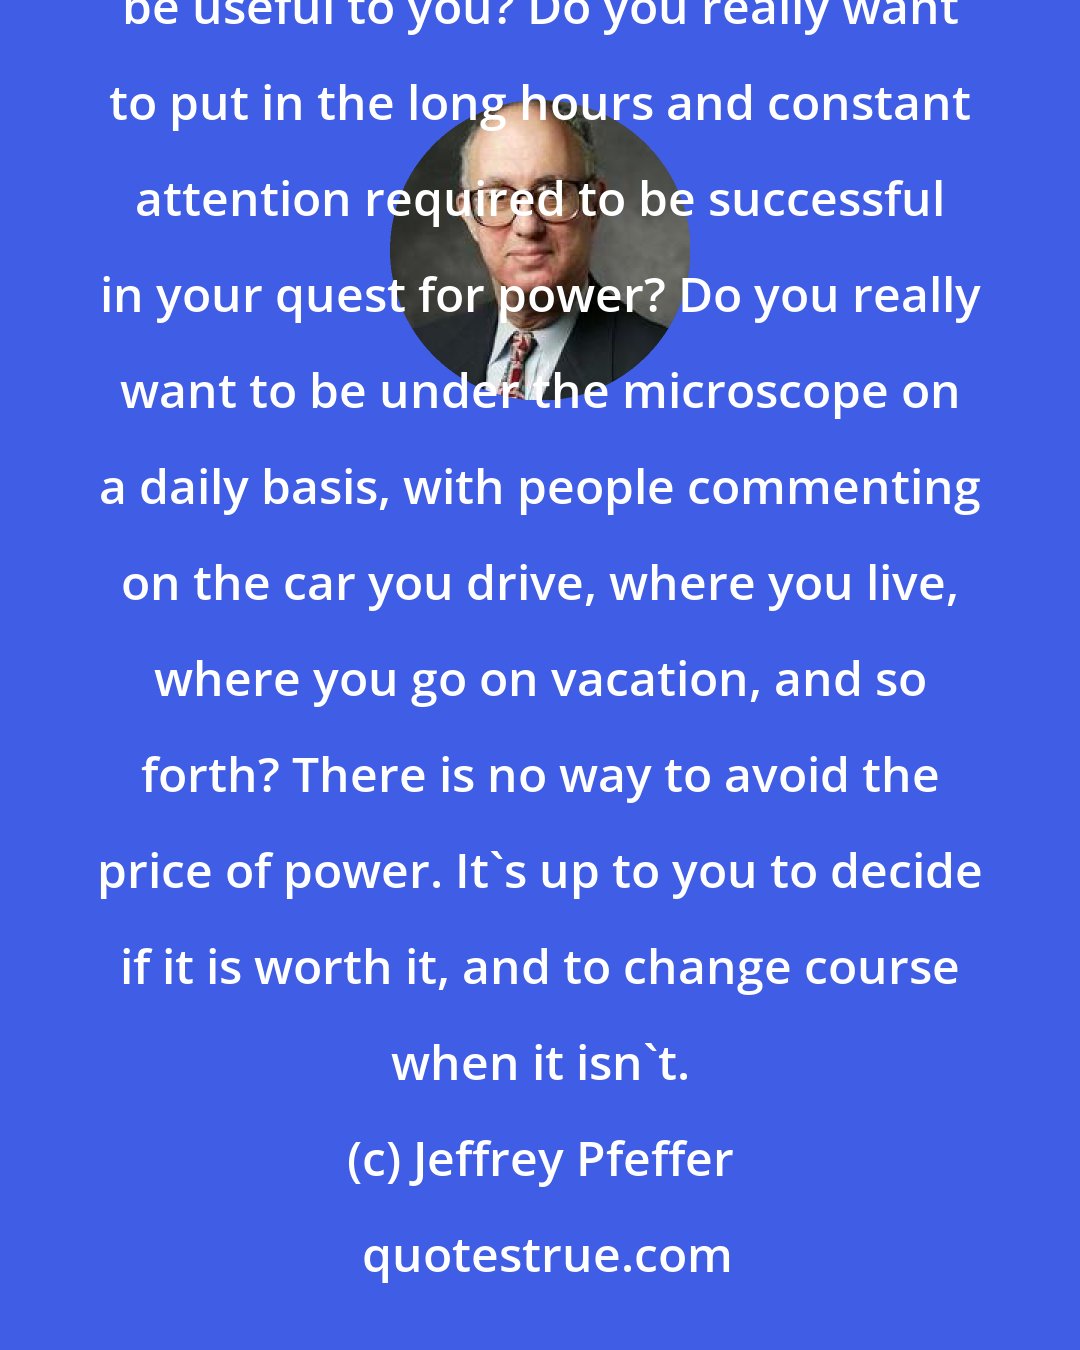 Jeffrey Pfeffer: Nothing comes without trade-offs. Do you want to spend time with people who like, or with people who might be useful to you? Do you really want to put in the long hours and constant attention required to be successful in your quest for power? Do you really want to be under the microscope on a daily basis, with people commenting on the car you drive, where you live, where you go on vacation, and so forth? There is no way to avoid the price of power. It's up to you to decide if it is worth it, and to change course when it isn't.